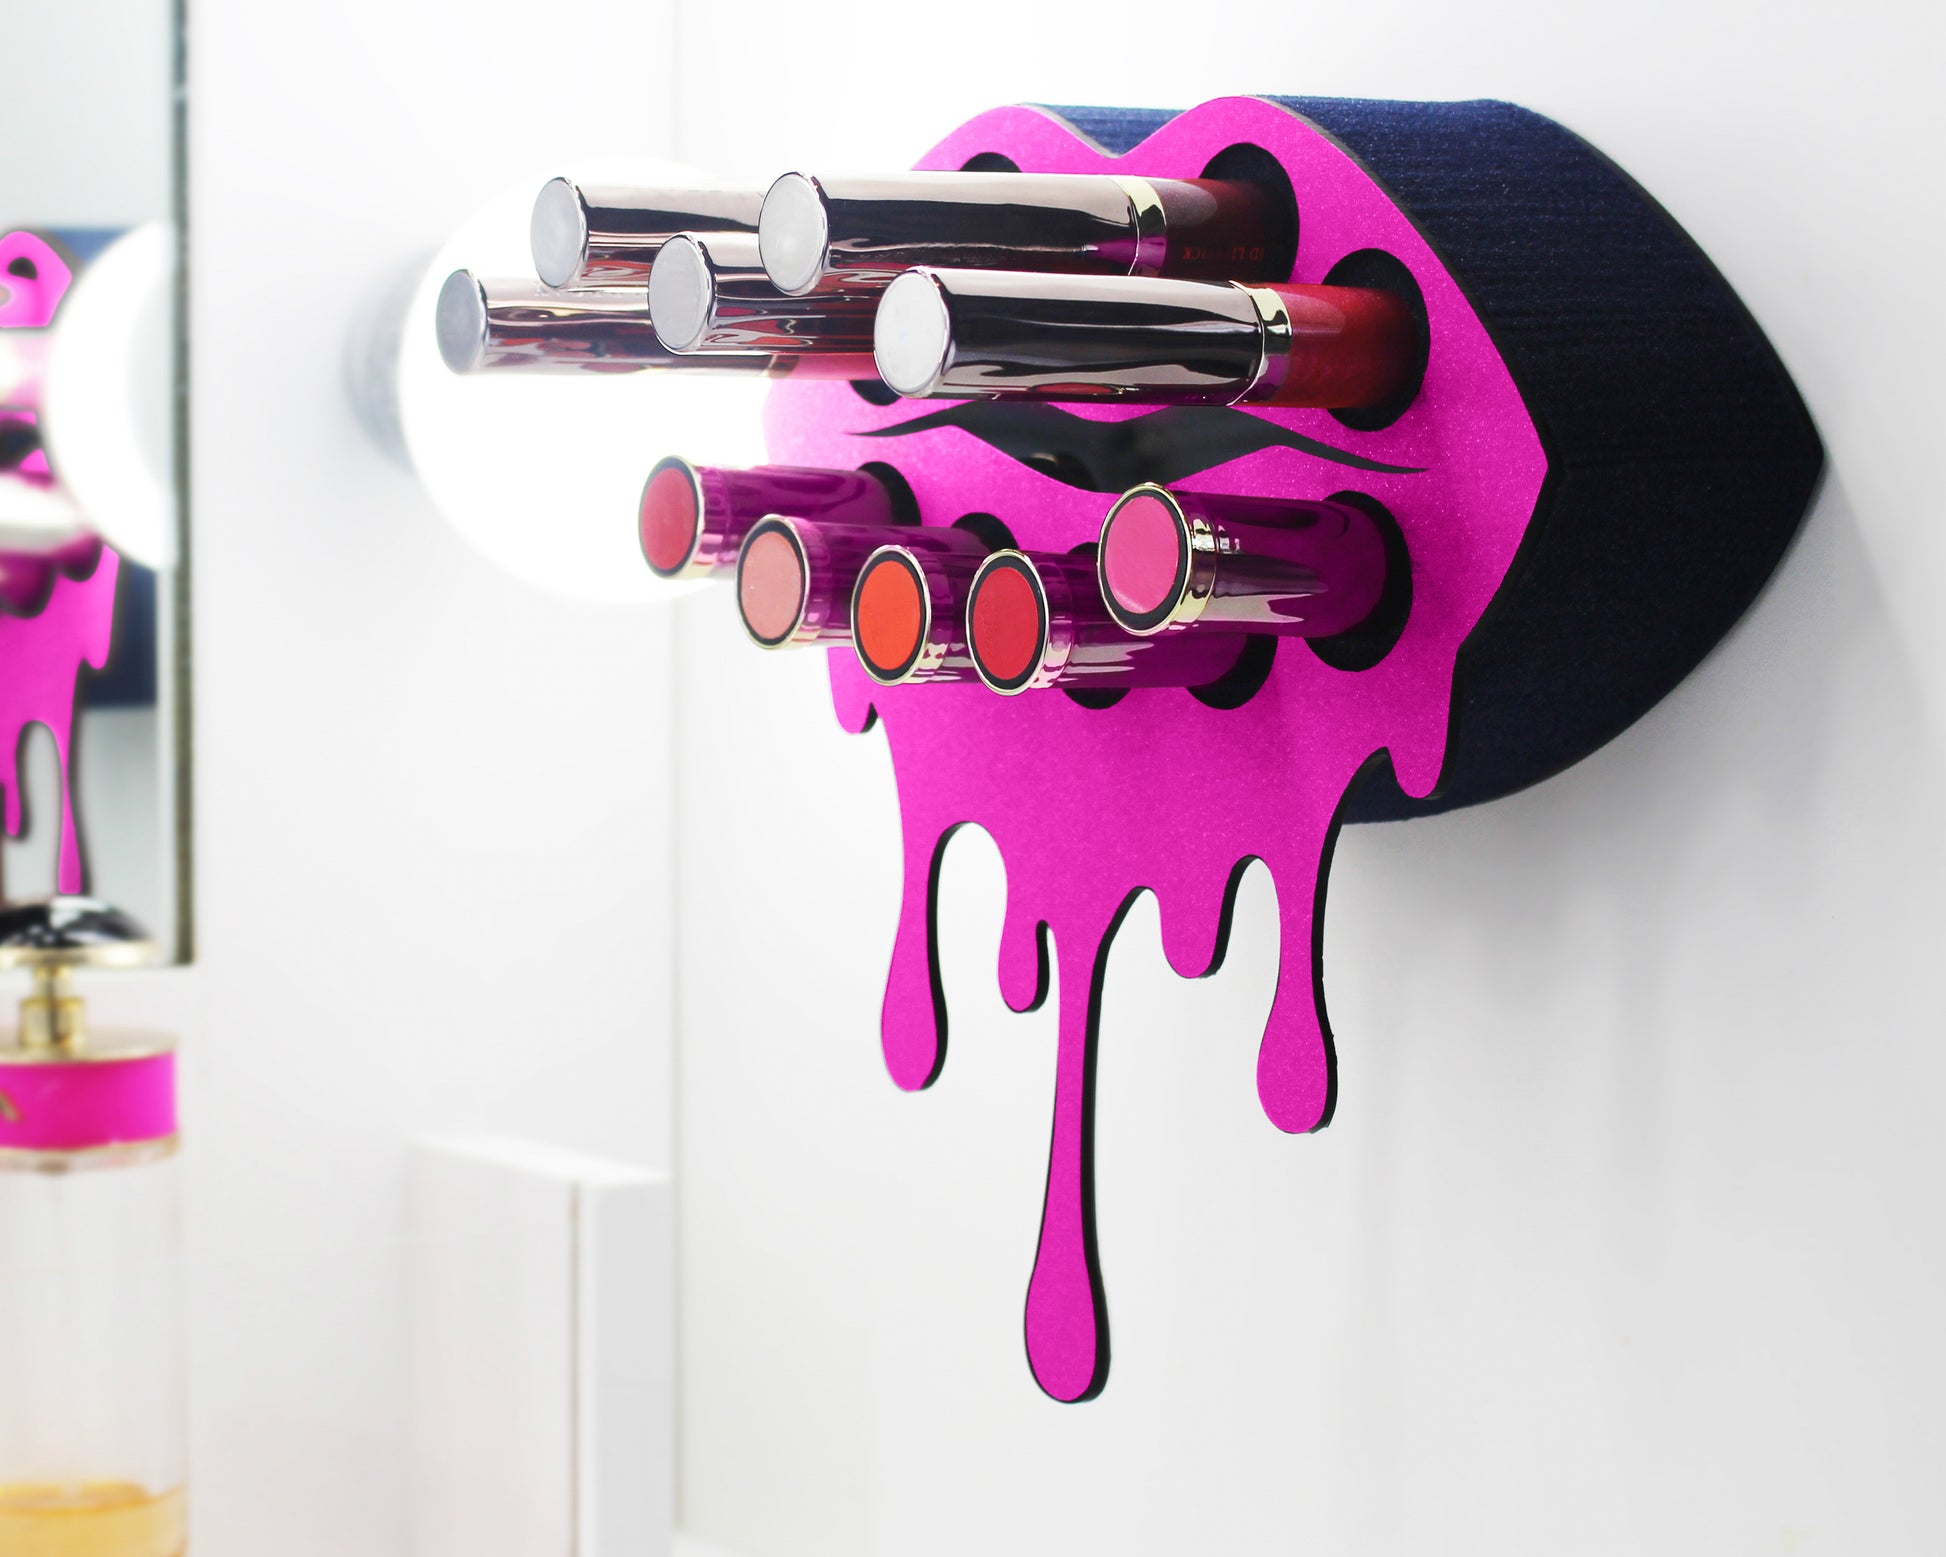 Small Lip Design Lipstick Organizer holding 10 lipsticks mounted on the wall with lipstick easily accessible and organized. Hanging Lipstick Holder that looks like wall art.